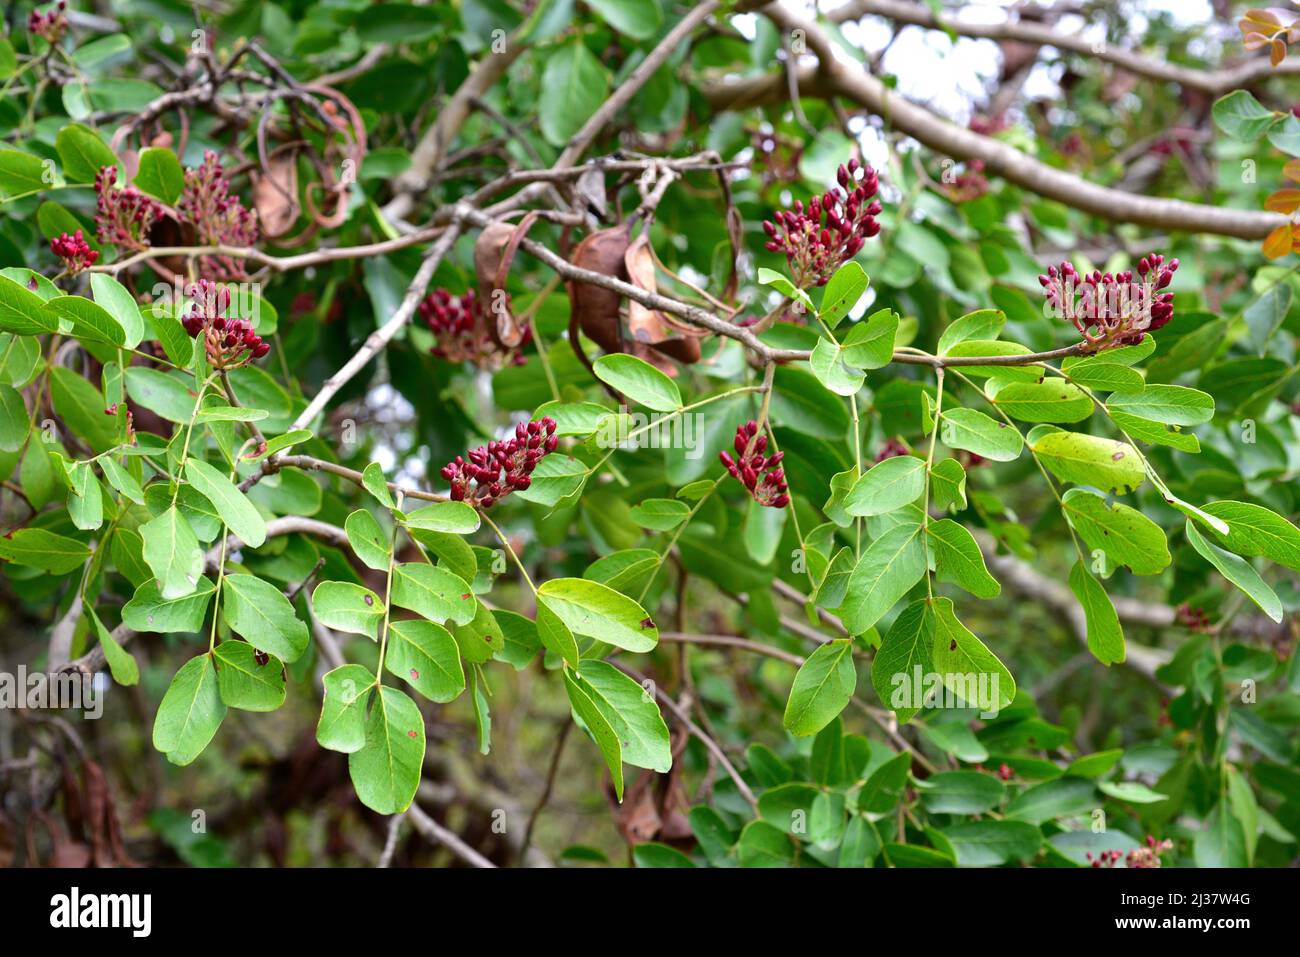 Weeping boer-bean (Schotia brachypetala or Schotia latifolia) is a deciduous tree native to southern Africa. Flower buds and leaves. Stock Photo